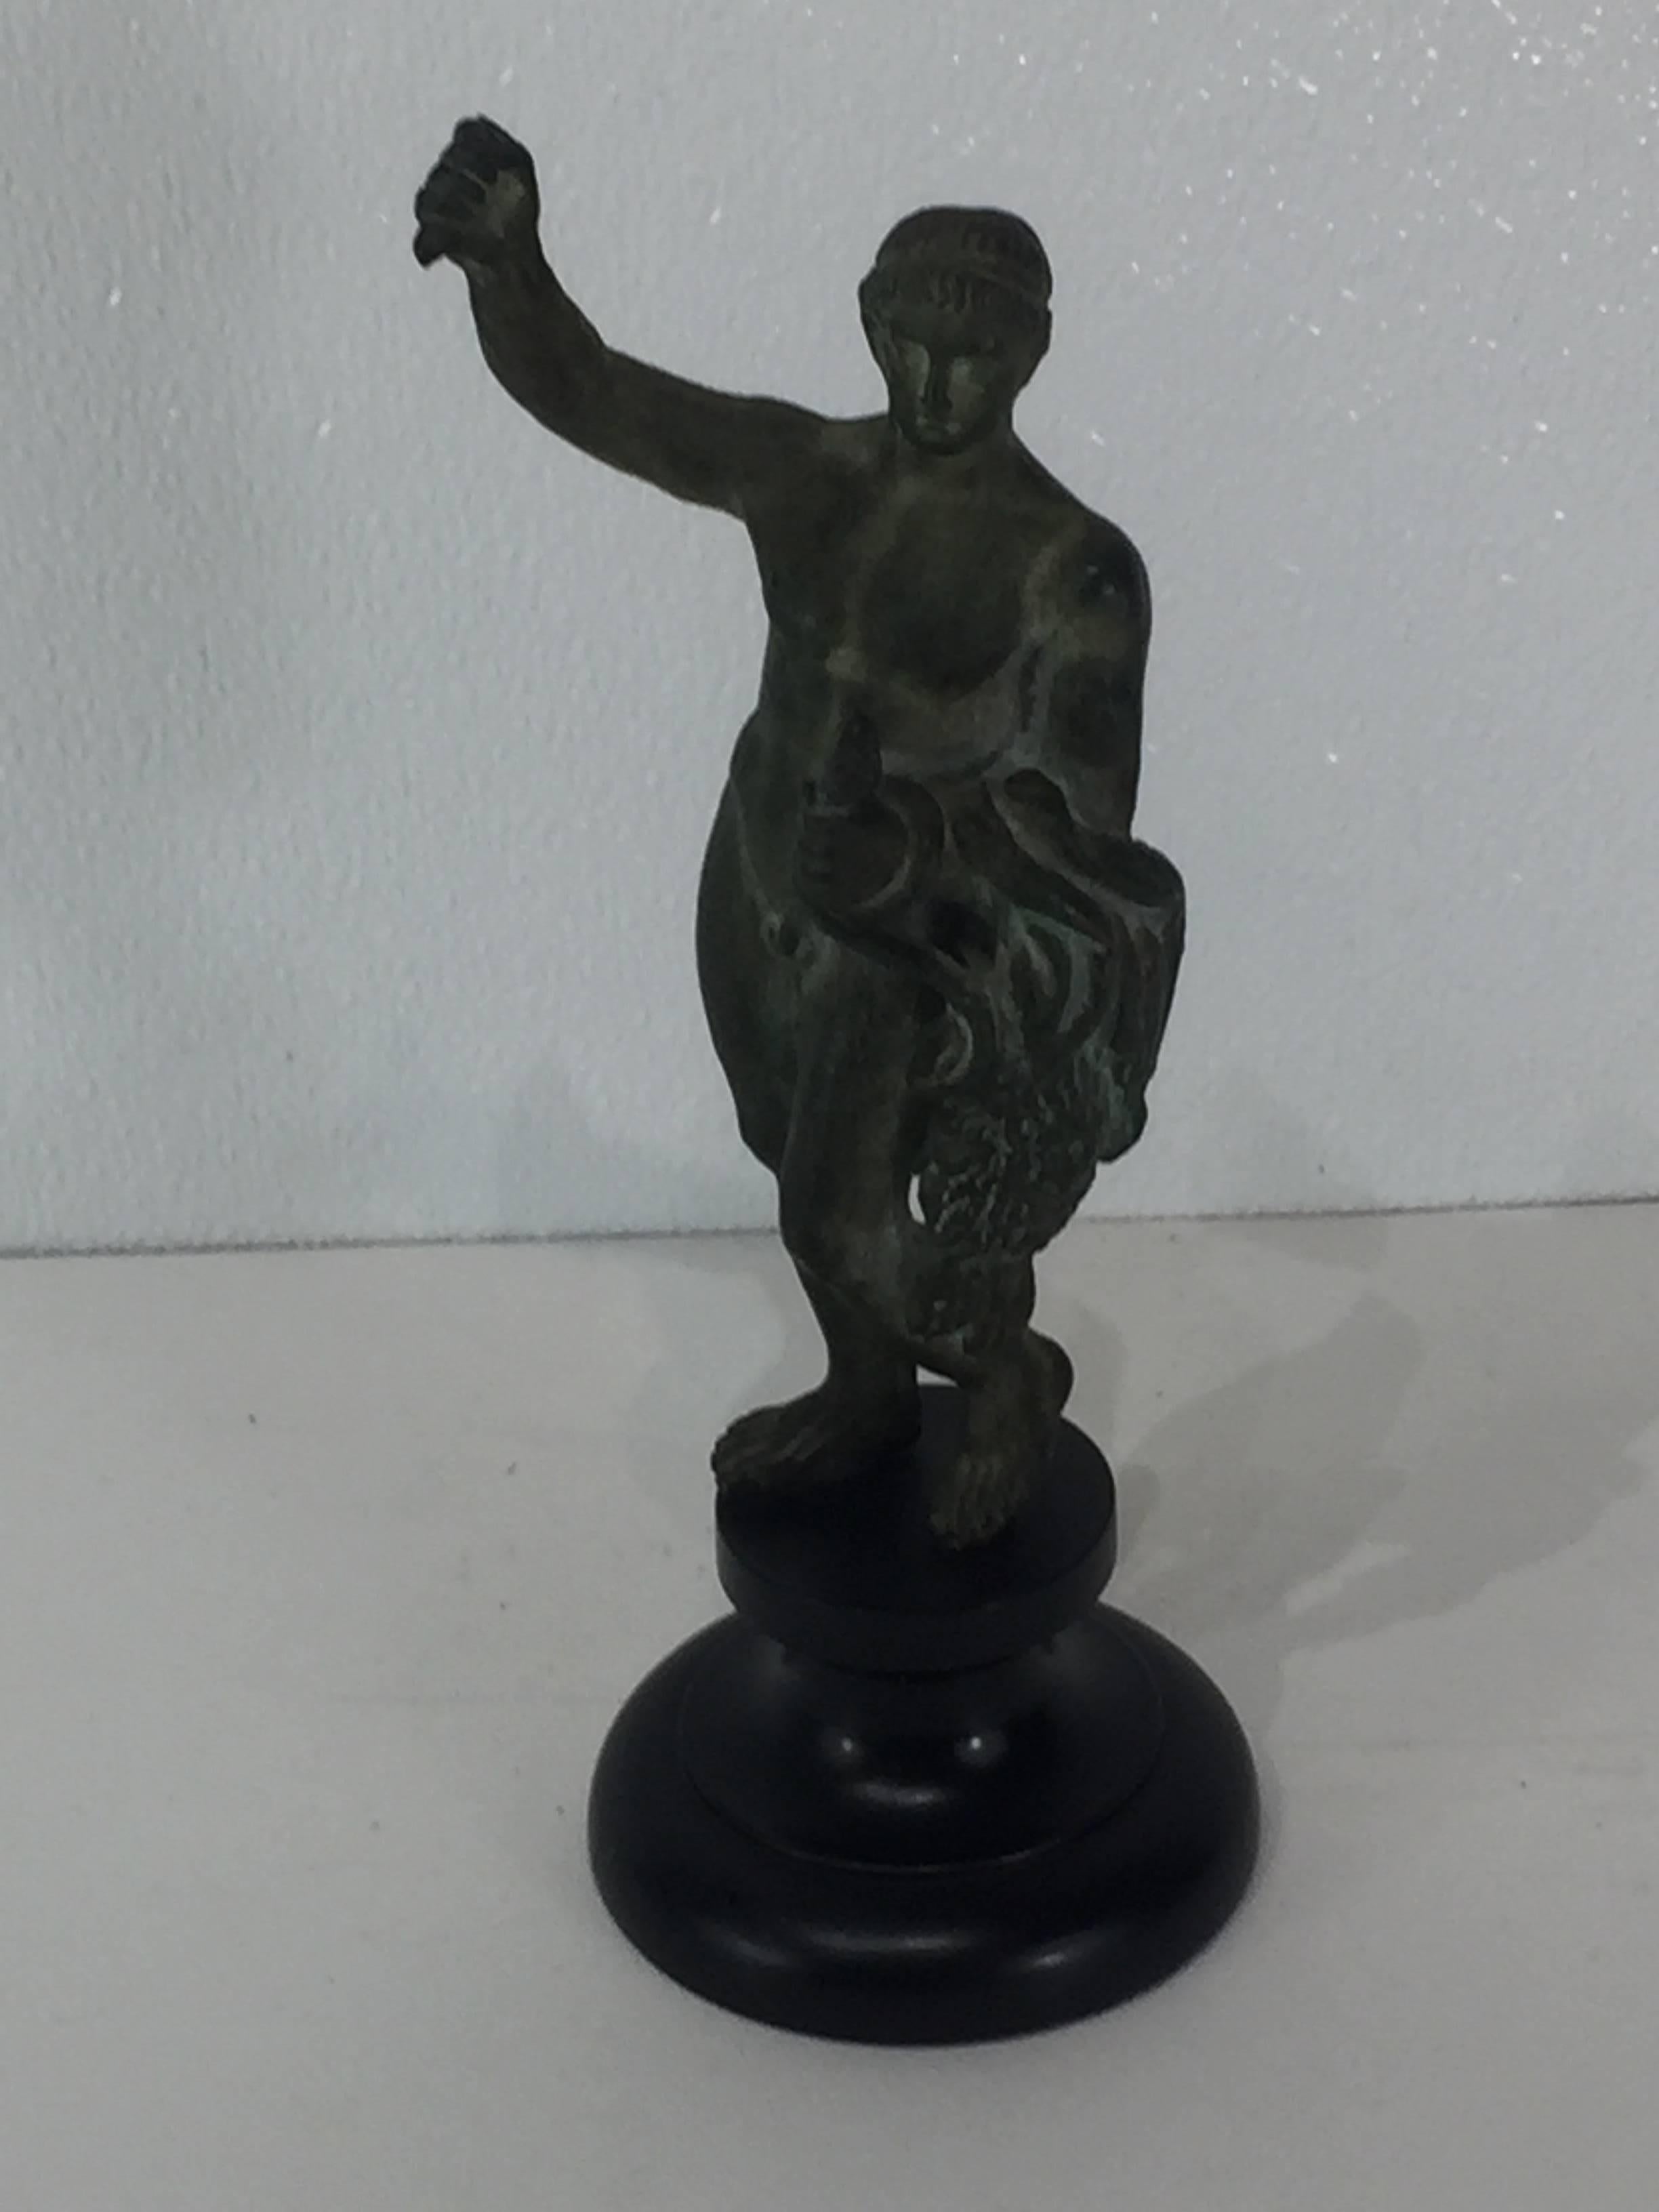 Grand Tour standing Hercules bronze, After the antique Roman bronze figure of Hercules holding a serpent, lion skin and club, His upright arm is holding a missing element, possibly a torch. Very heavy casting. The figure stands 8.5